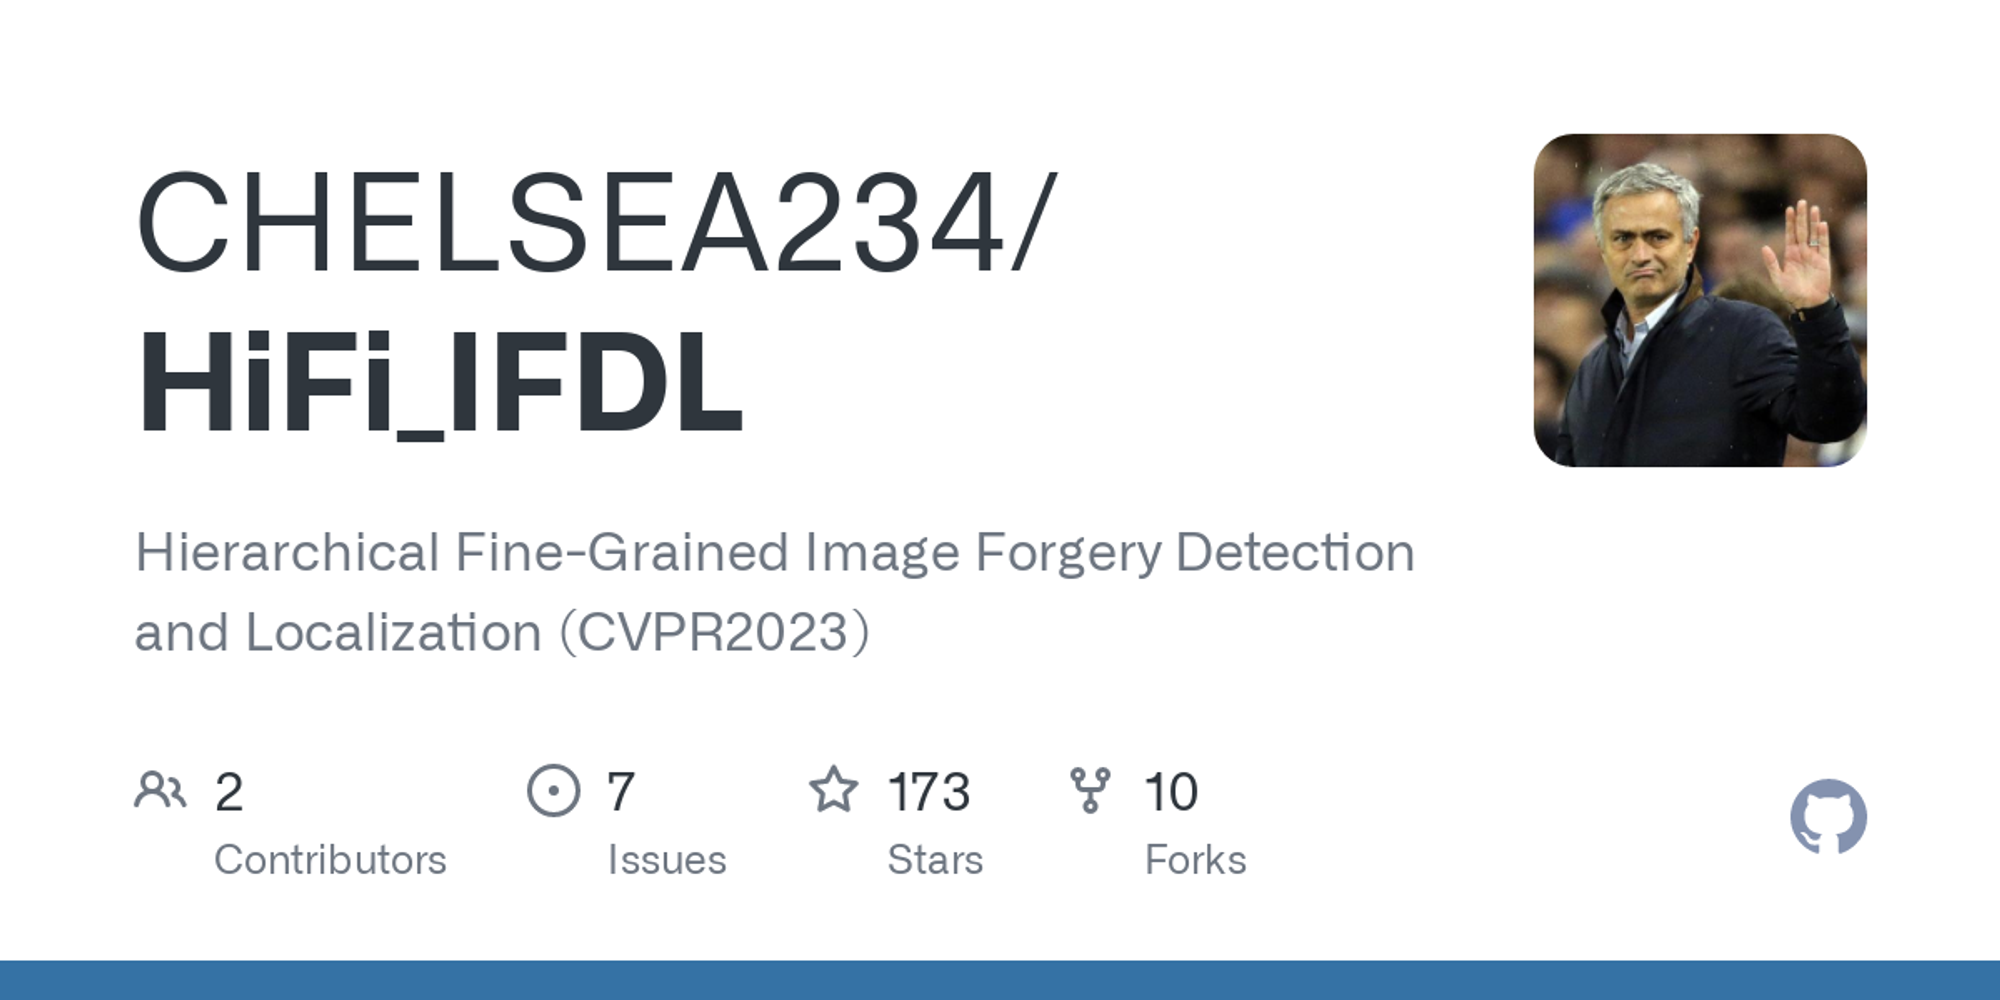 GitHub - CHELSEA234/HiFi_IFDL: Hierarchical Fine-Grained Image Forgery Detection and Localization (CVPR2023)